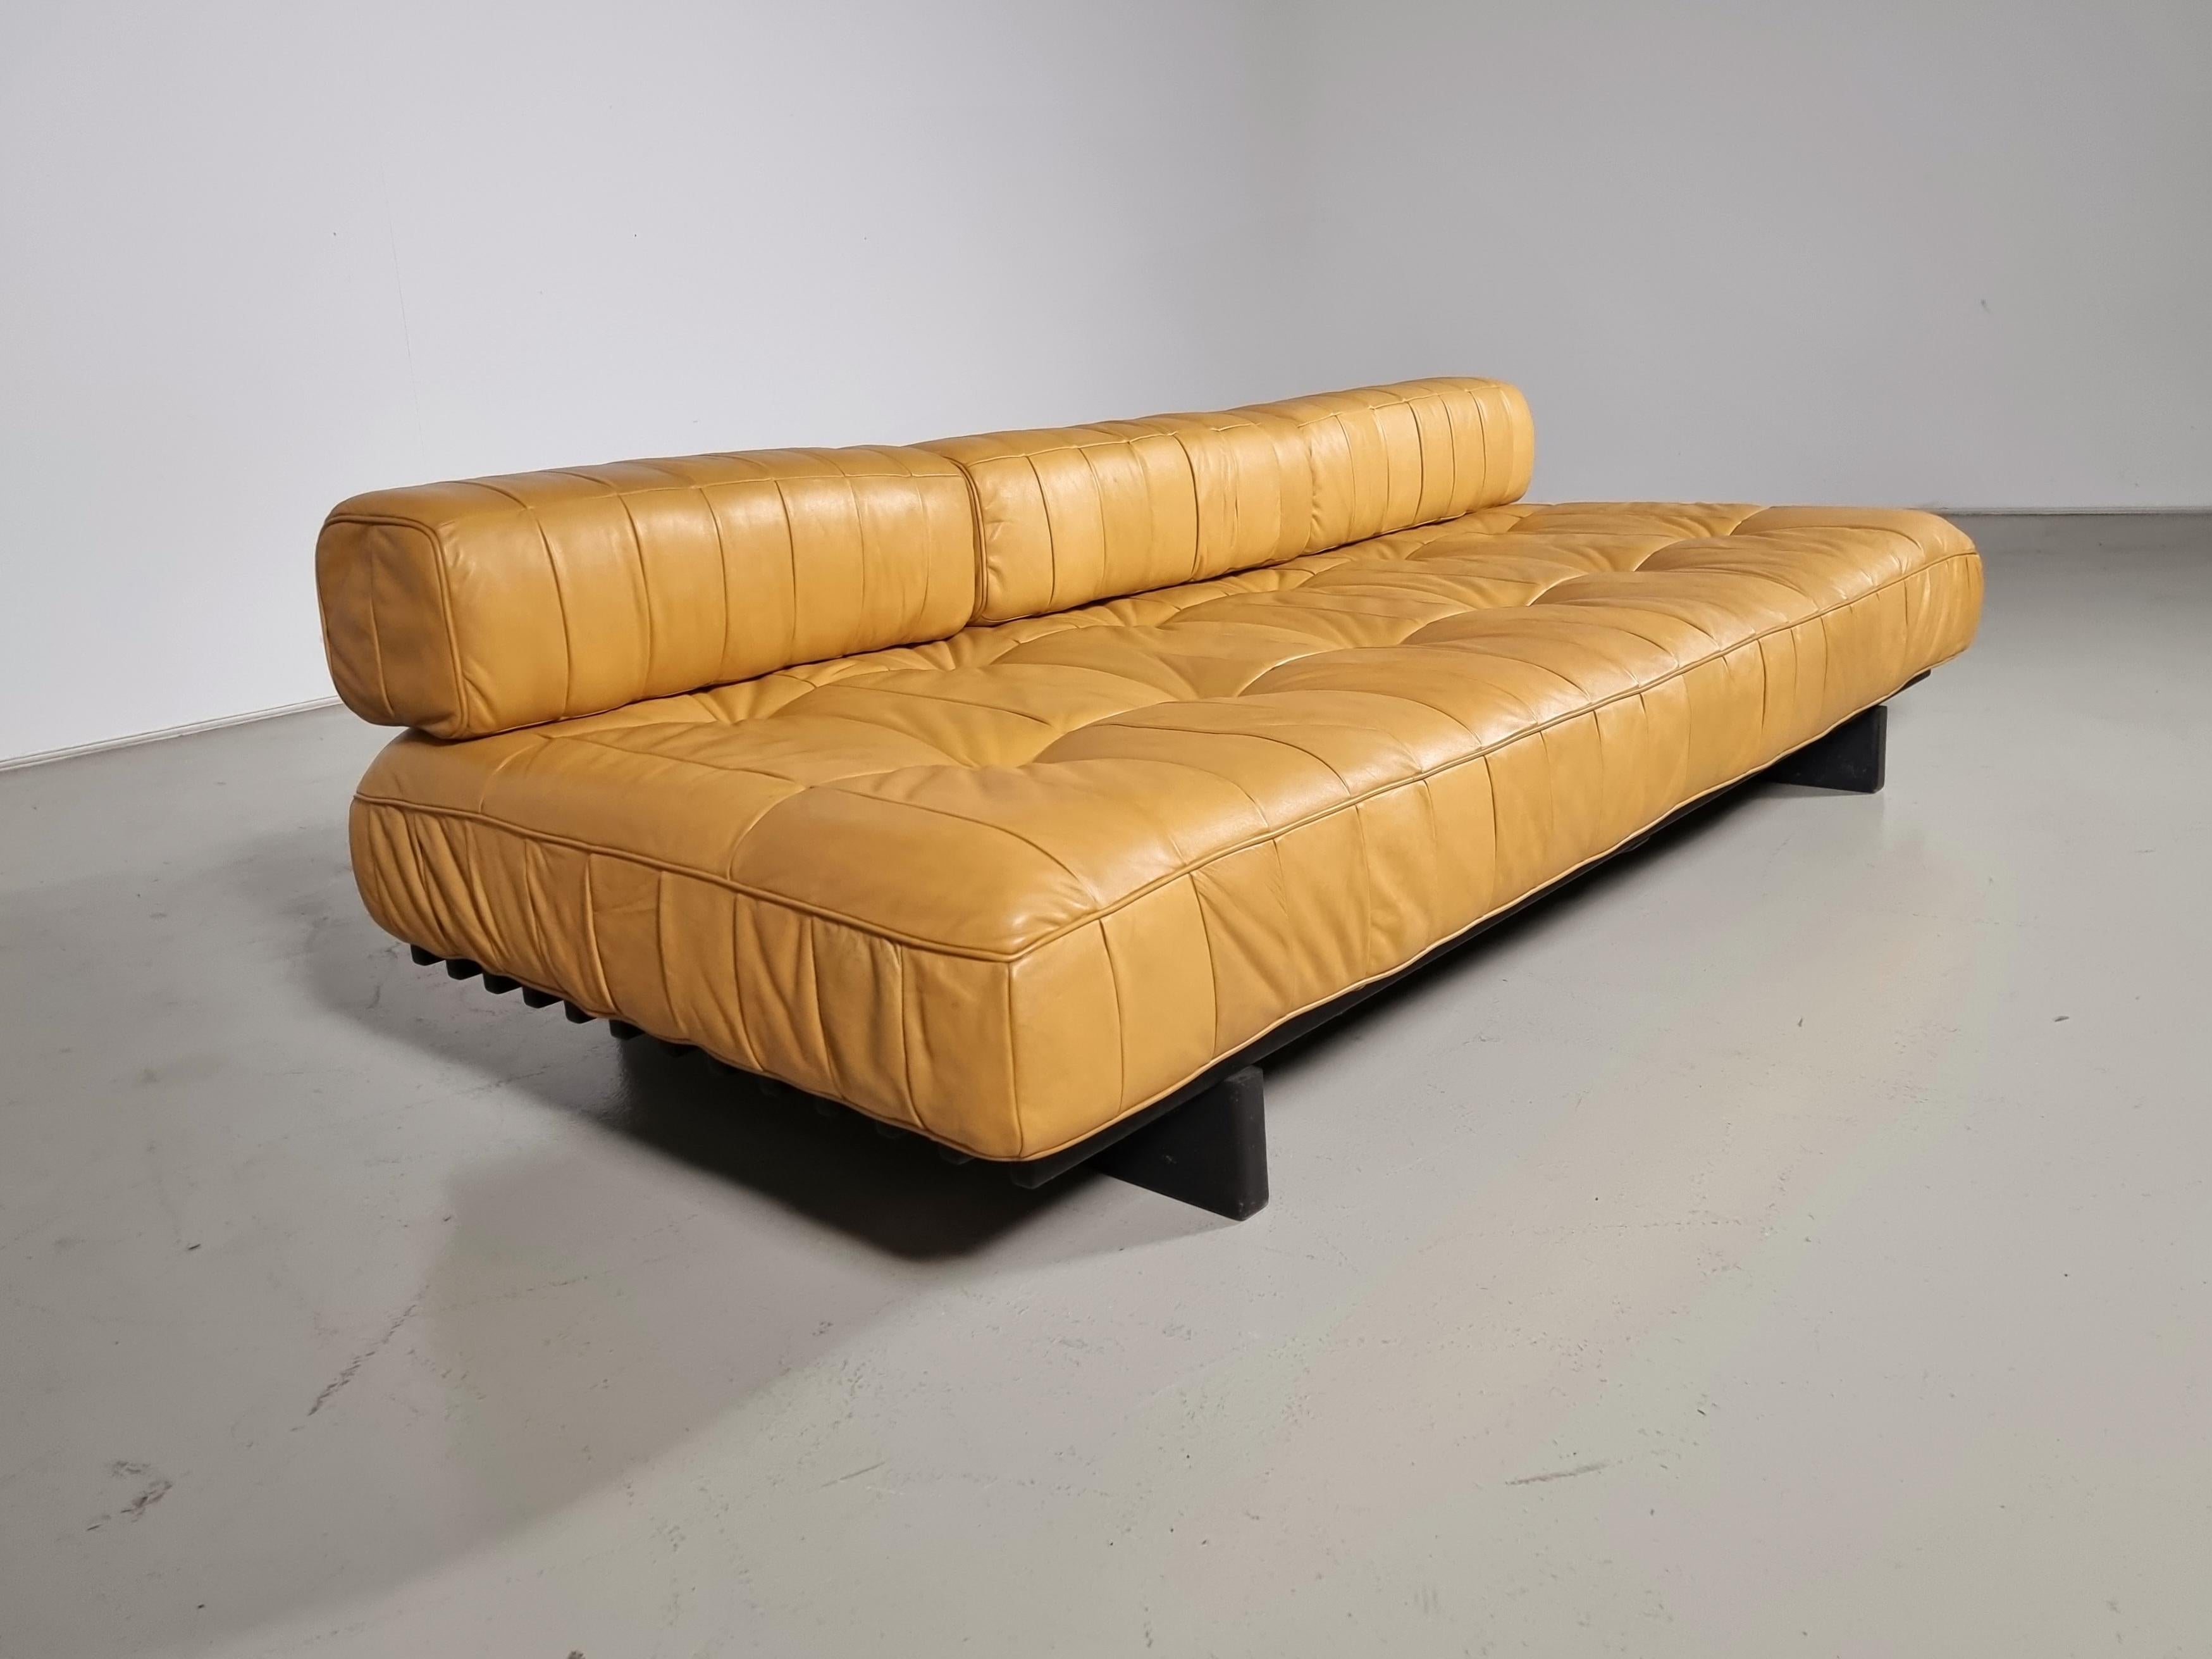 De Sede DS80 light cognac leather patchwork daybed, Switzerland, 1970. Upholstered in its beautiful and soft original aniline leather. 

The DS-80 sofa unites all of the characteristics of De Sede‘s furniture. Excellent manufacturing quality,